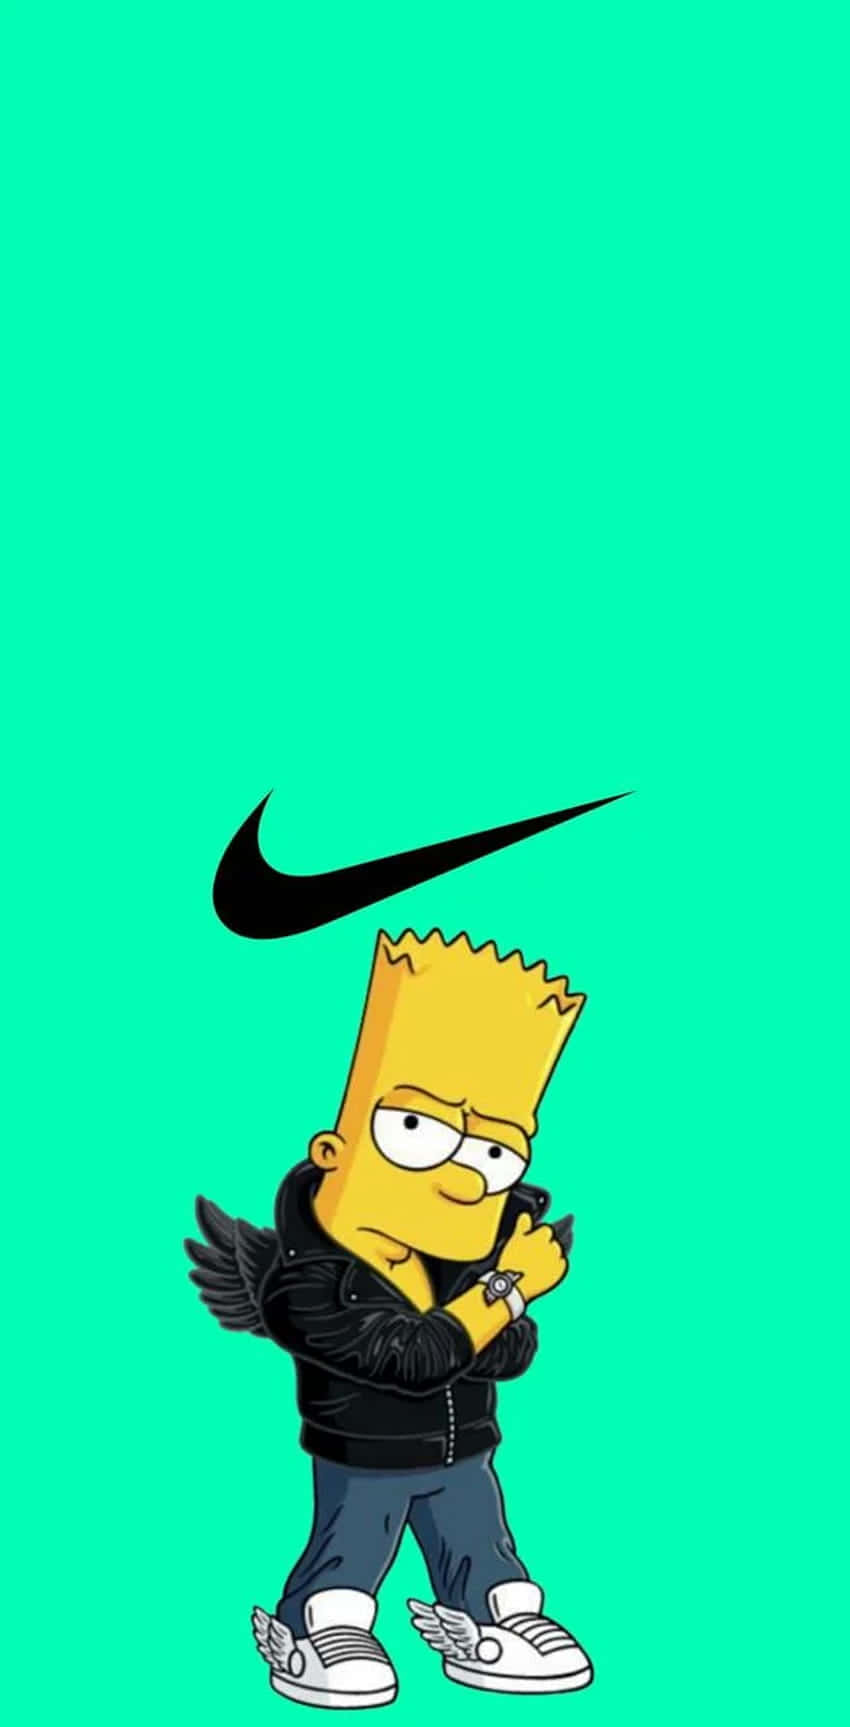 The Dope Simpsons Are Ready To Dance Wallpaper